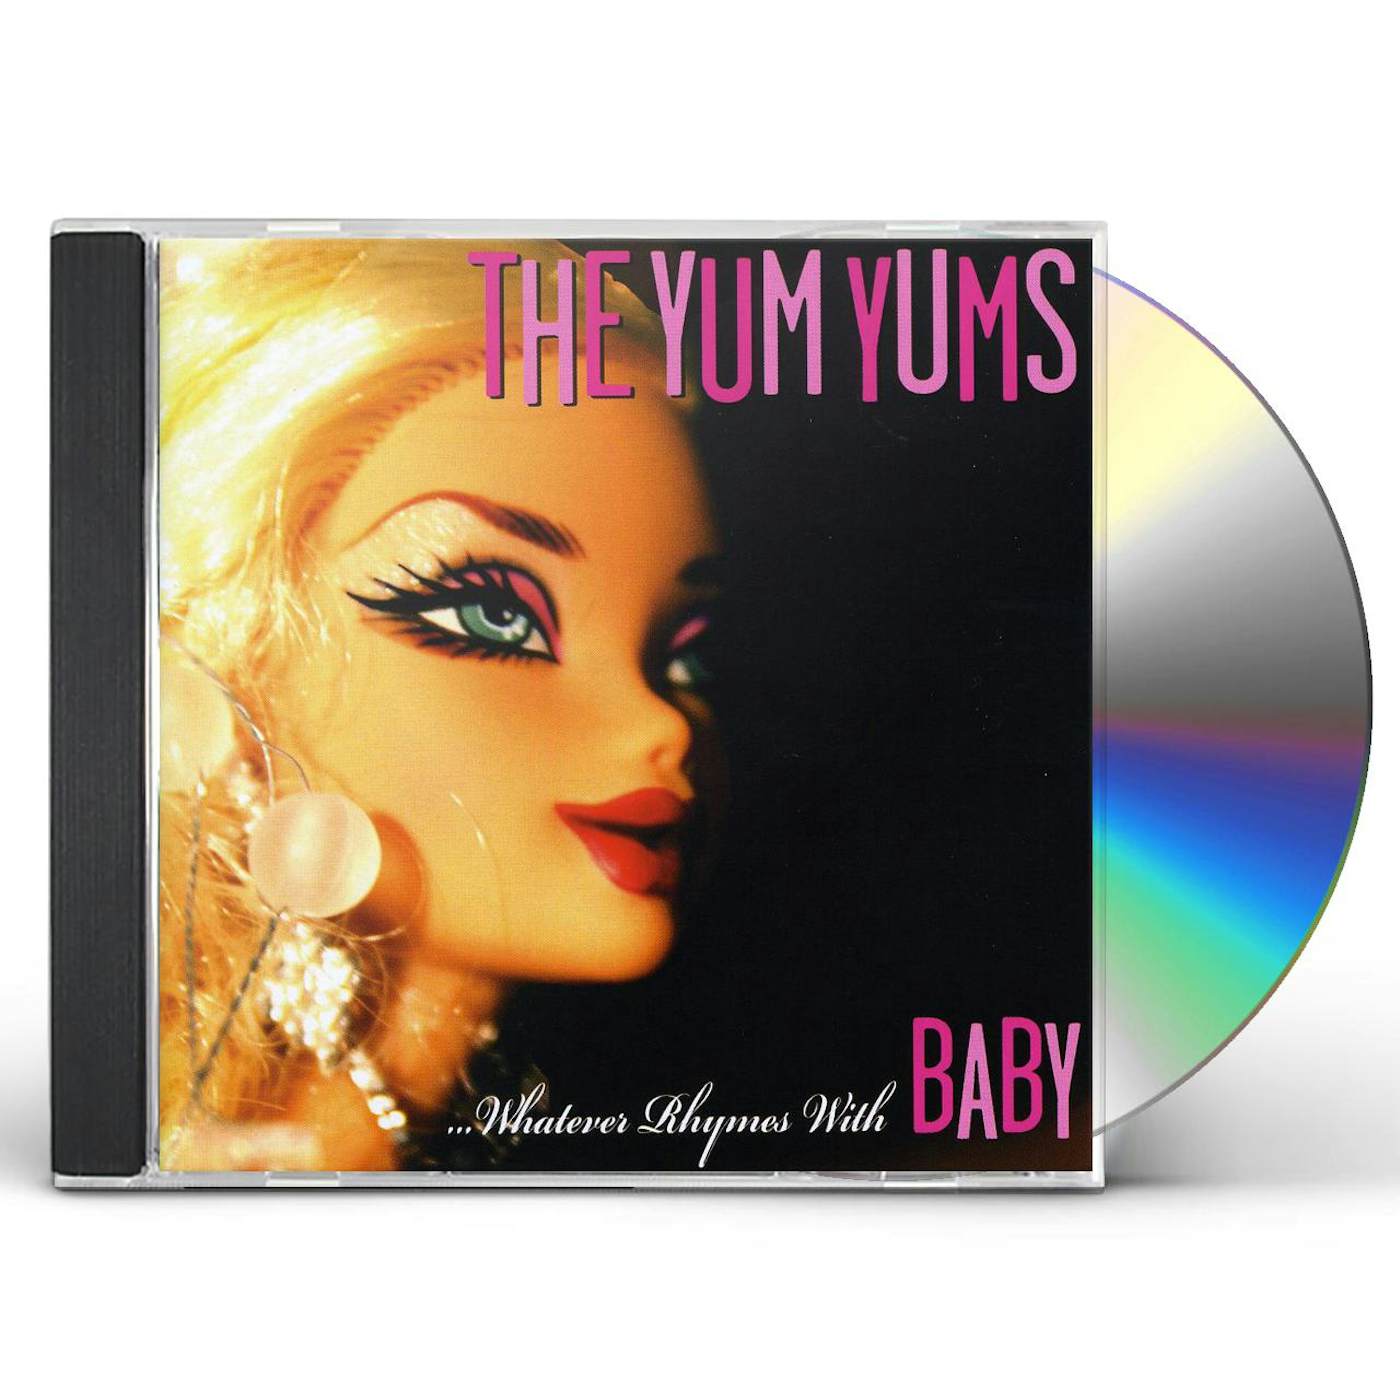 The Yum Yums WHATEVER RHYMES WITH BABY CD